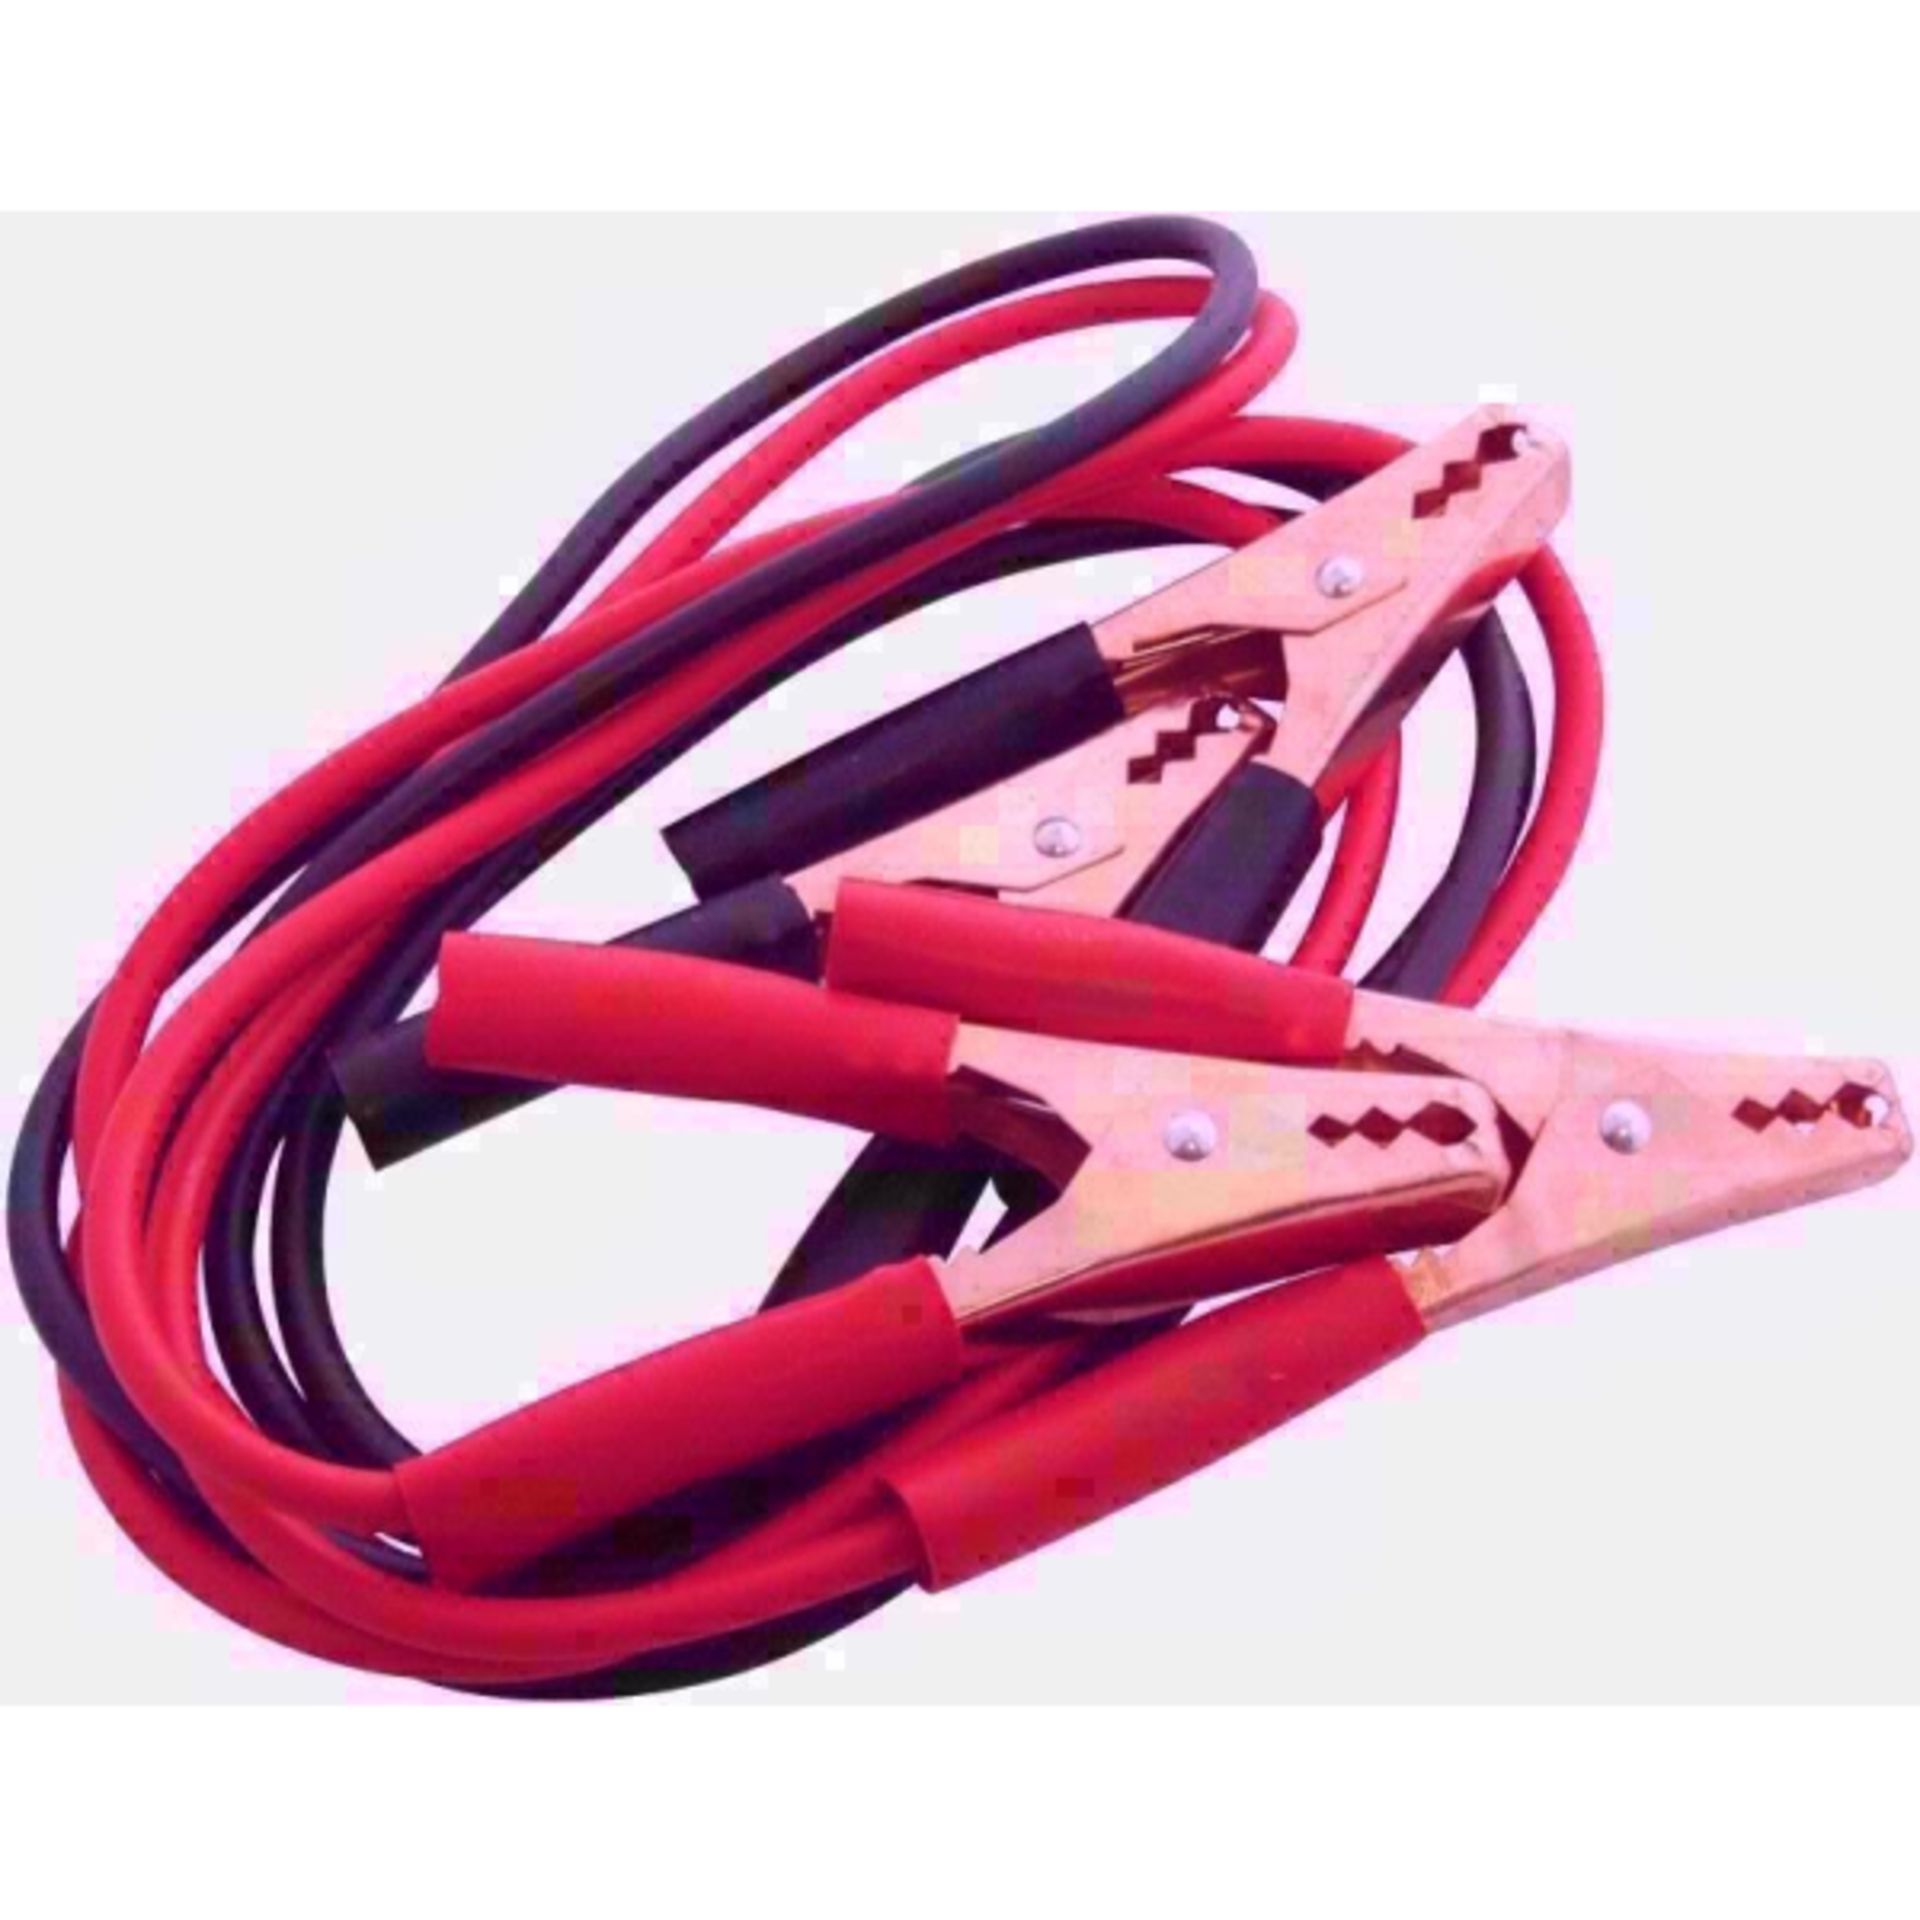 V *TRADE QTY* Brand New 800amp Booster Cable Jump Leads X 10 YOUR BID PRICE TO BE MULTIPLIED BY TEN